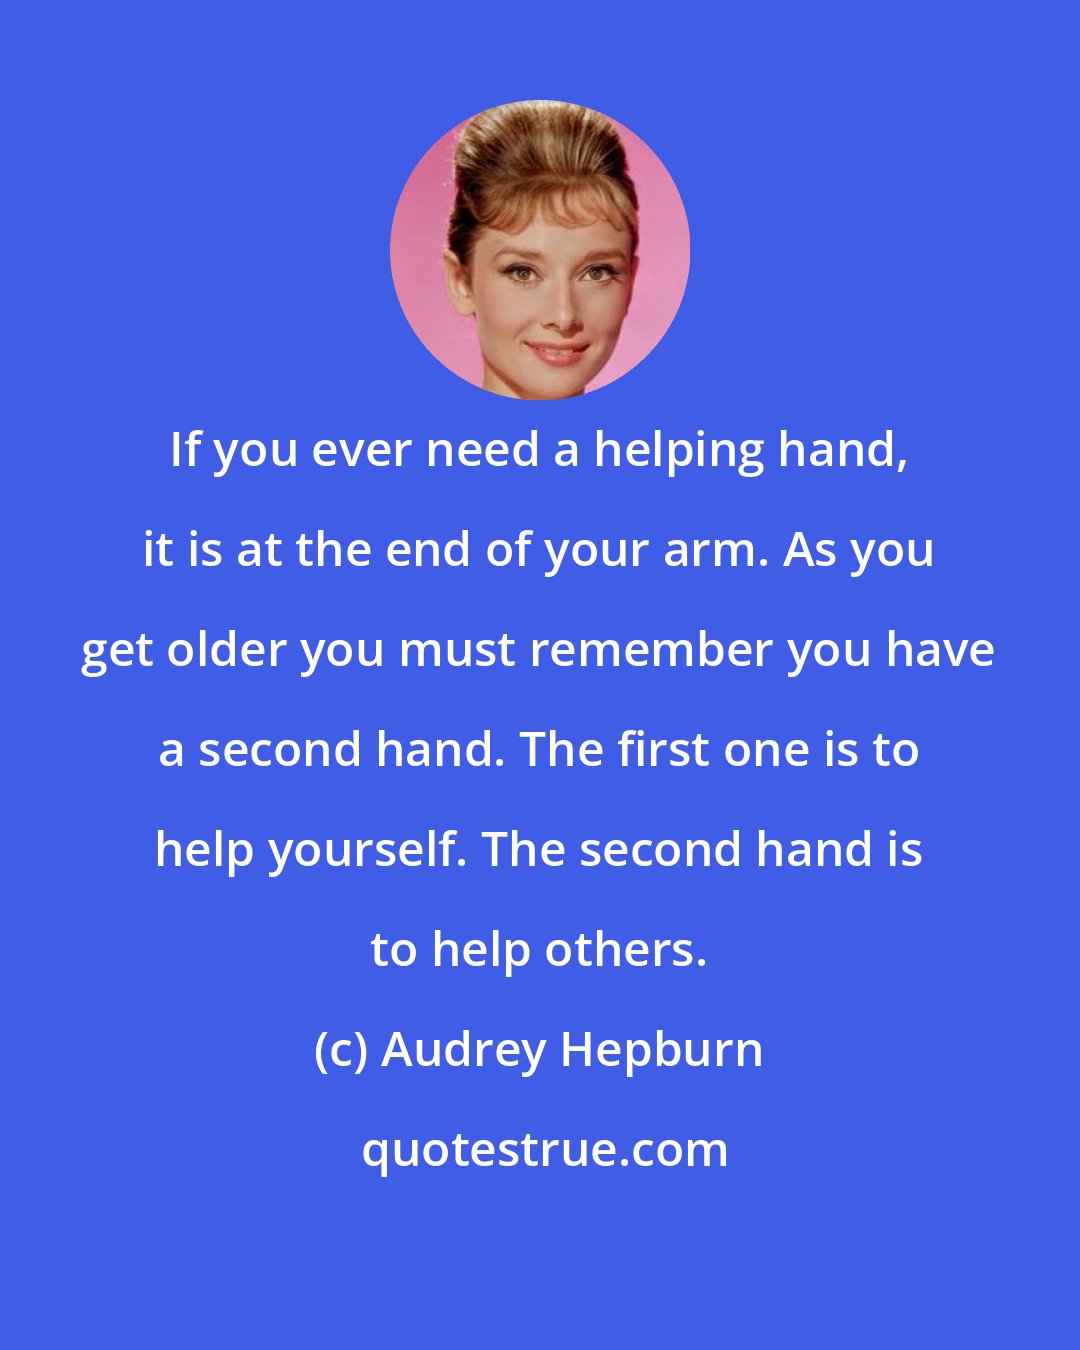 Audrey Hepburn: If you ever need a helping hand, it is at the end of your arm. As you get older you must remember you have a second hand. The first one is to help yourself. The second hand is to help others.